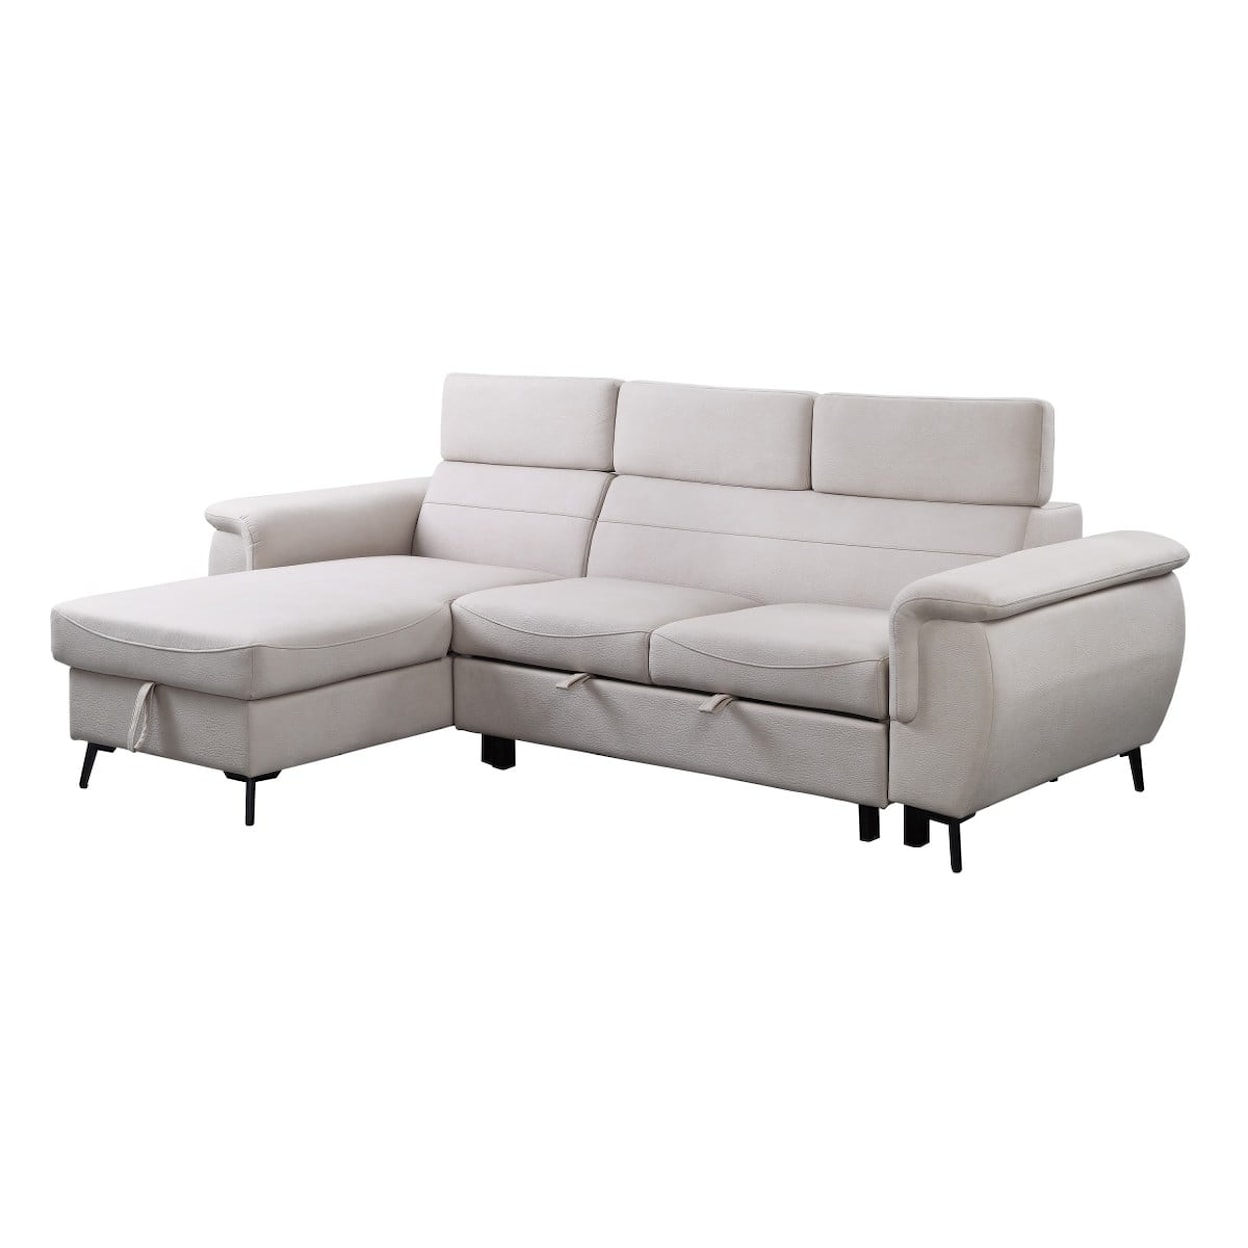 Homelegance Cadence 2-Piece Reversible Sectional